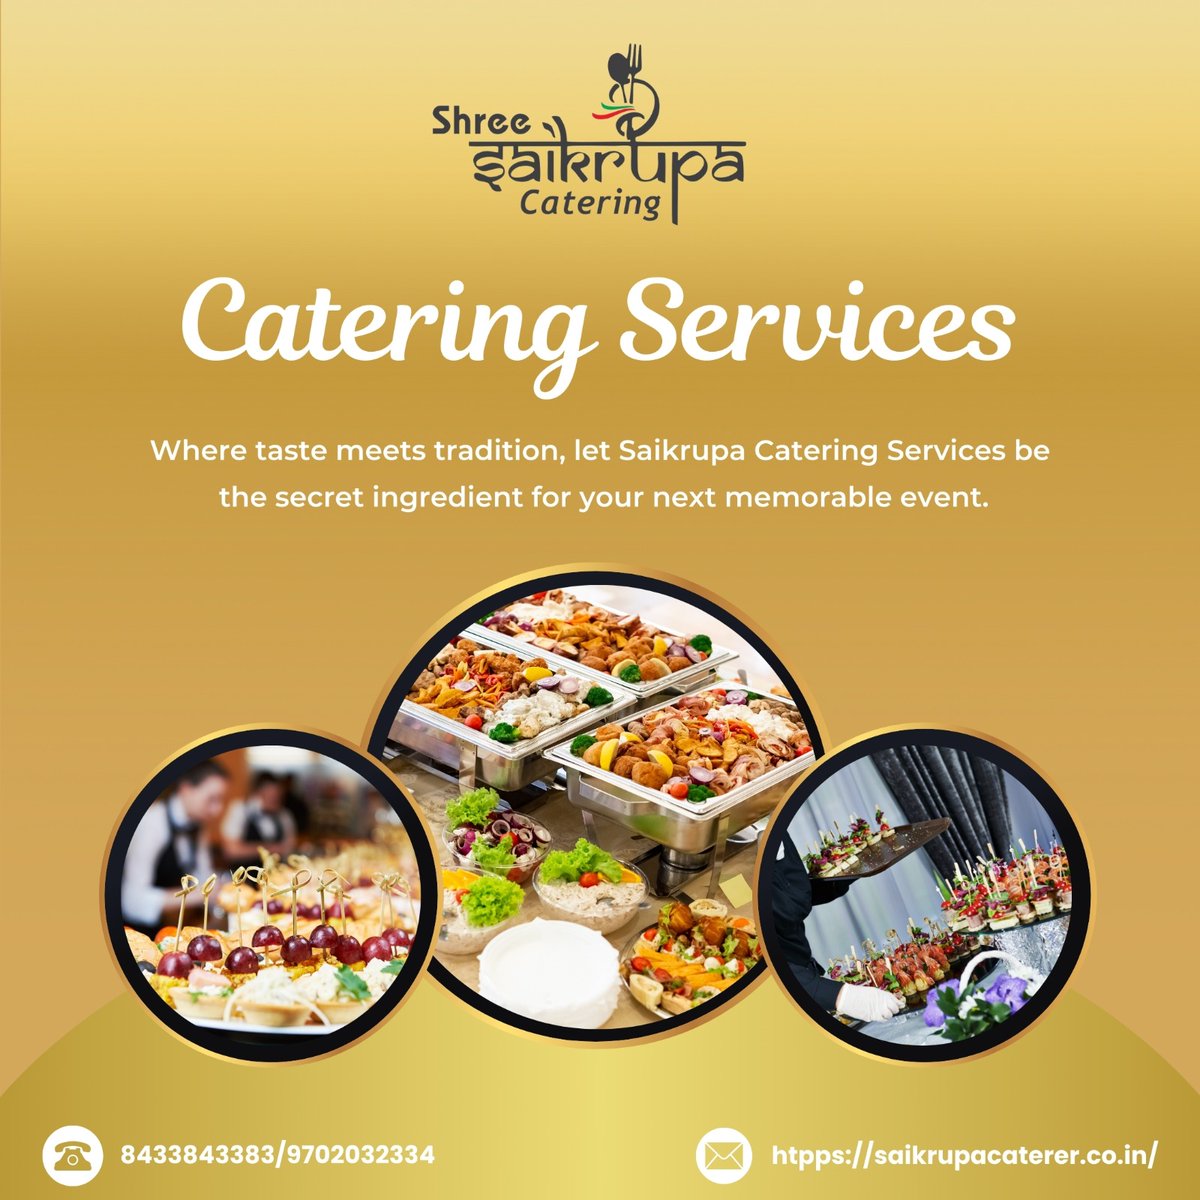 Let Saikrupa Catering Services be the secret ingredient for your next memorable event.🍽️✨ 

#SaikrupaCatering #EventCatering #TasteOfTradition #MemorableMoments #CateringPerfection